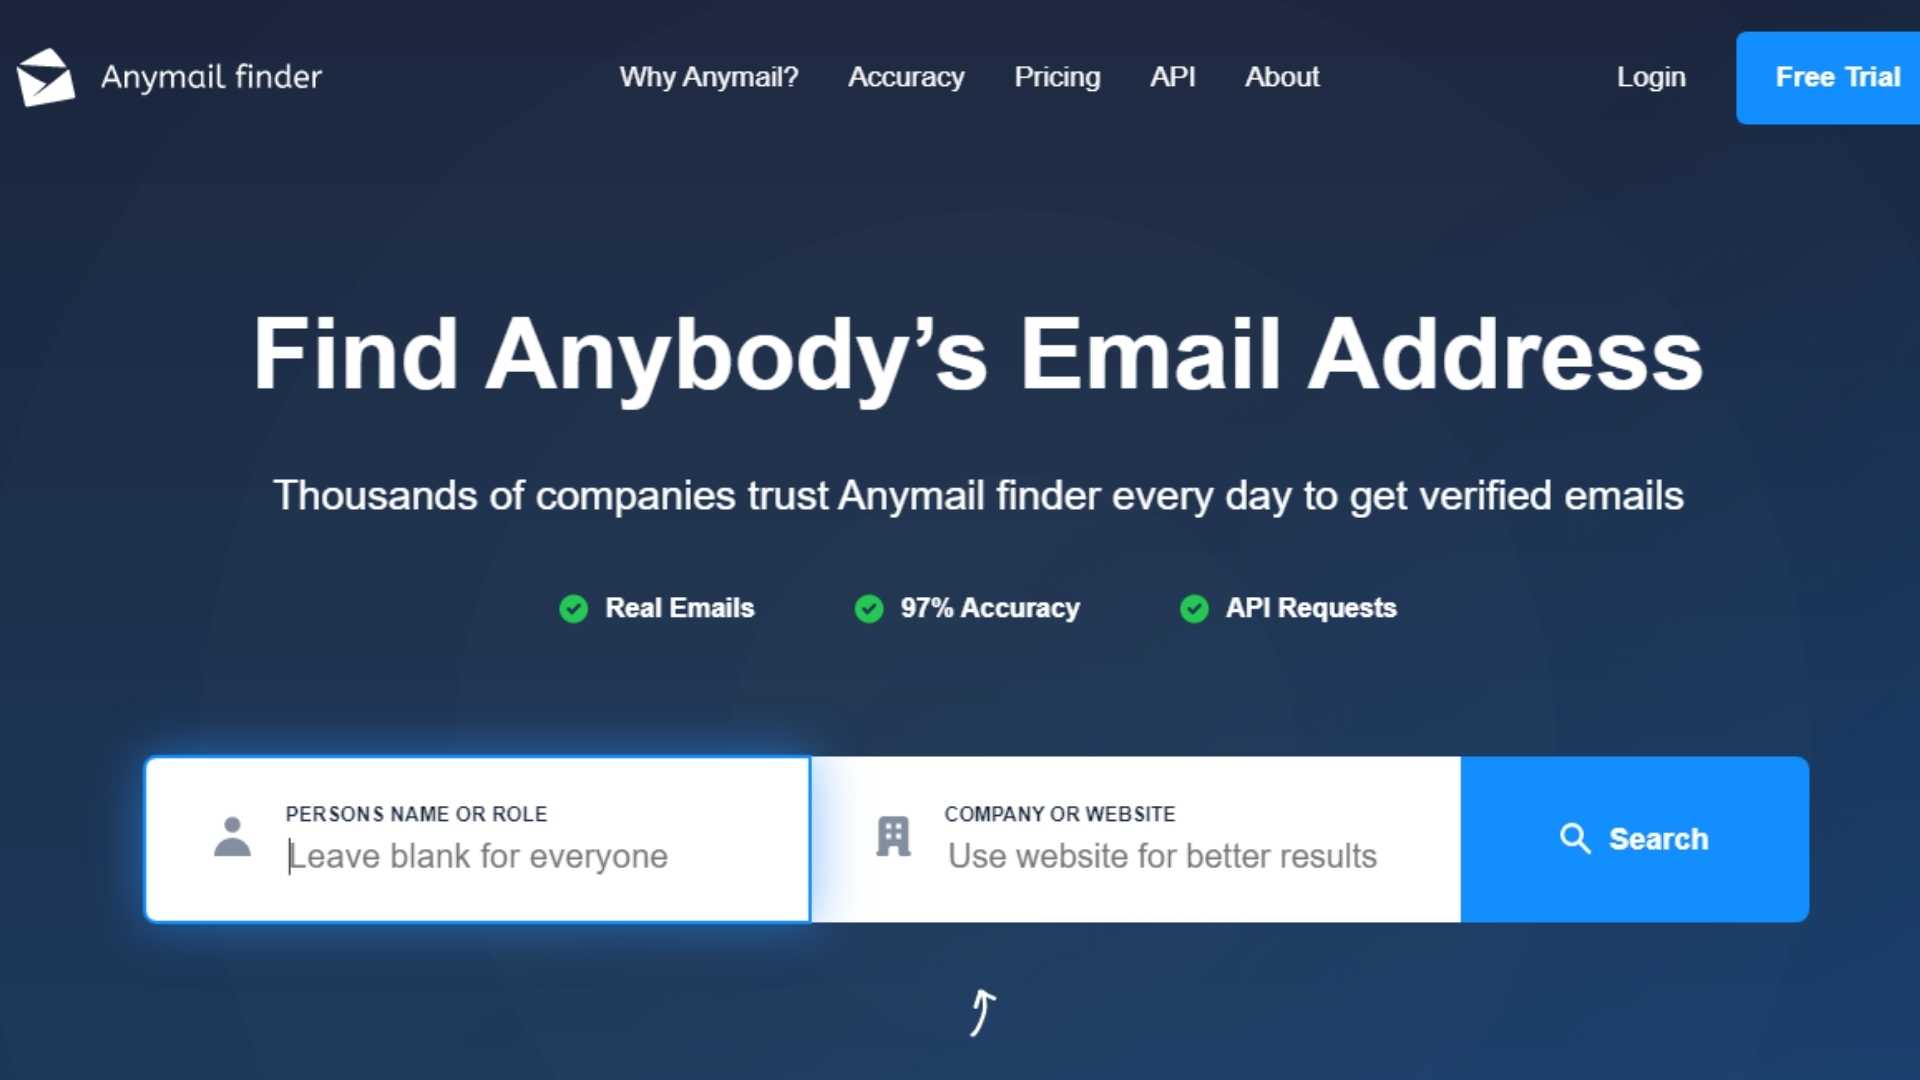 Anymail FInder Tool